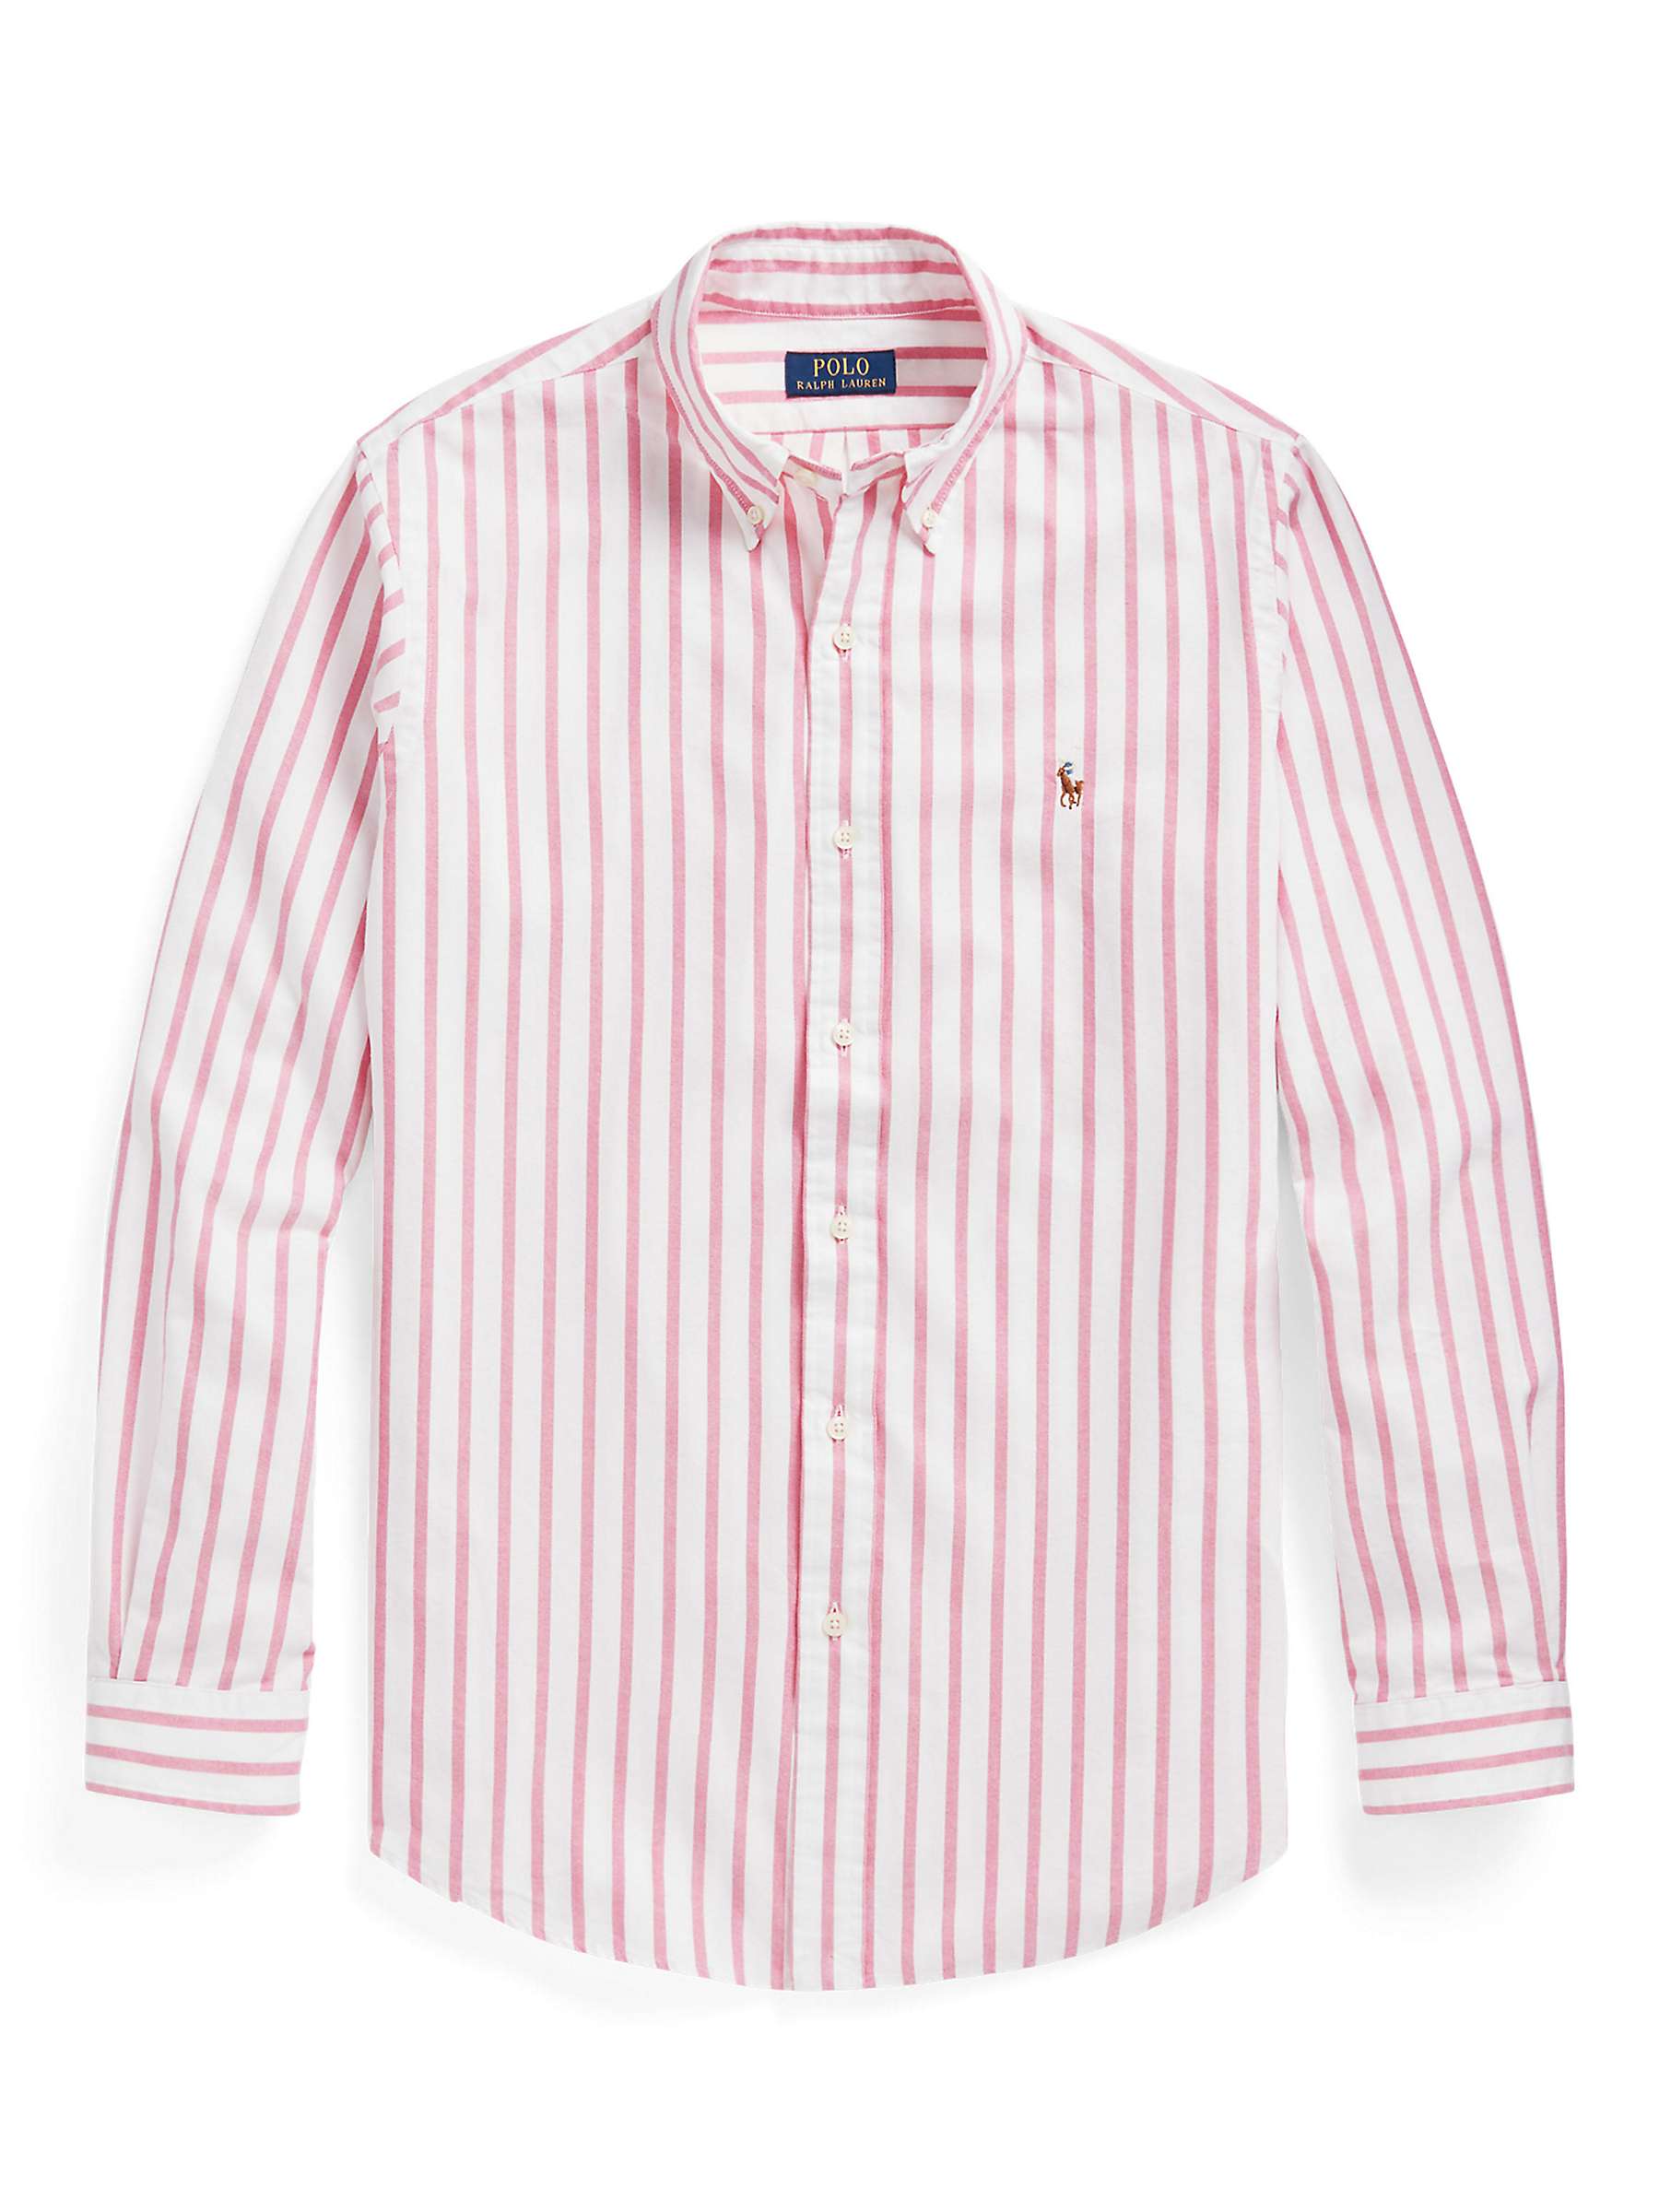 Buy Polo Ralph Lauren Custom Fit Striped Oxford Shirt, Pink/White Online at johnlewis.com